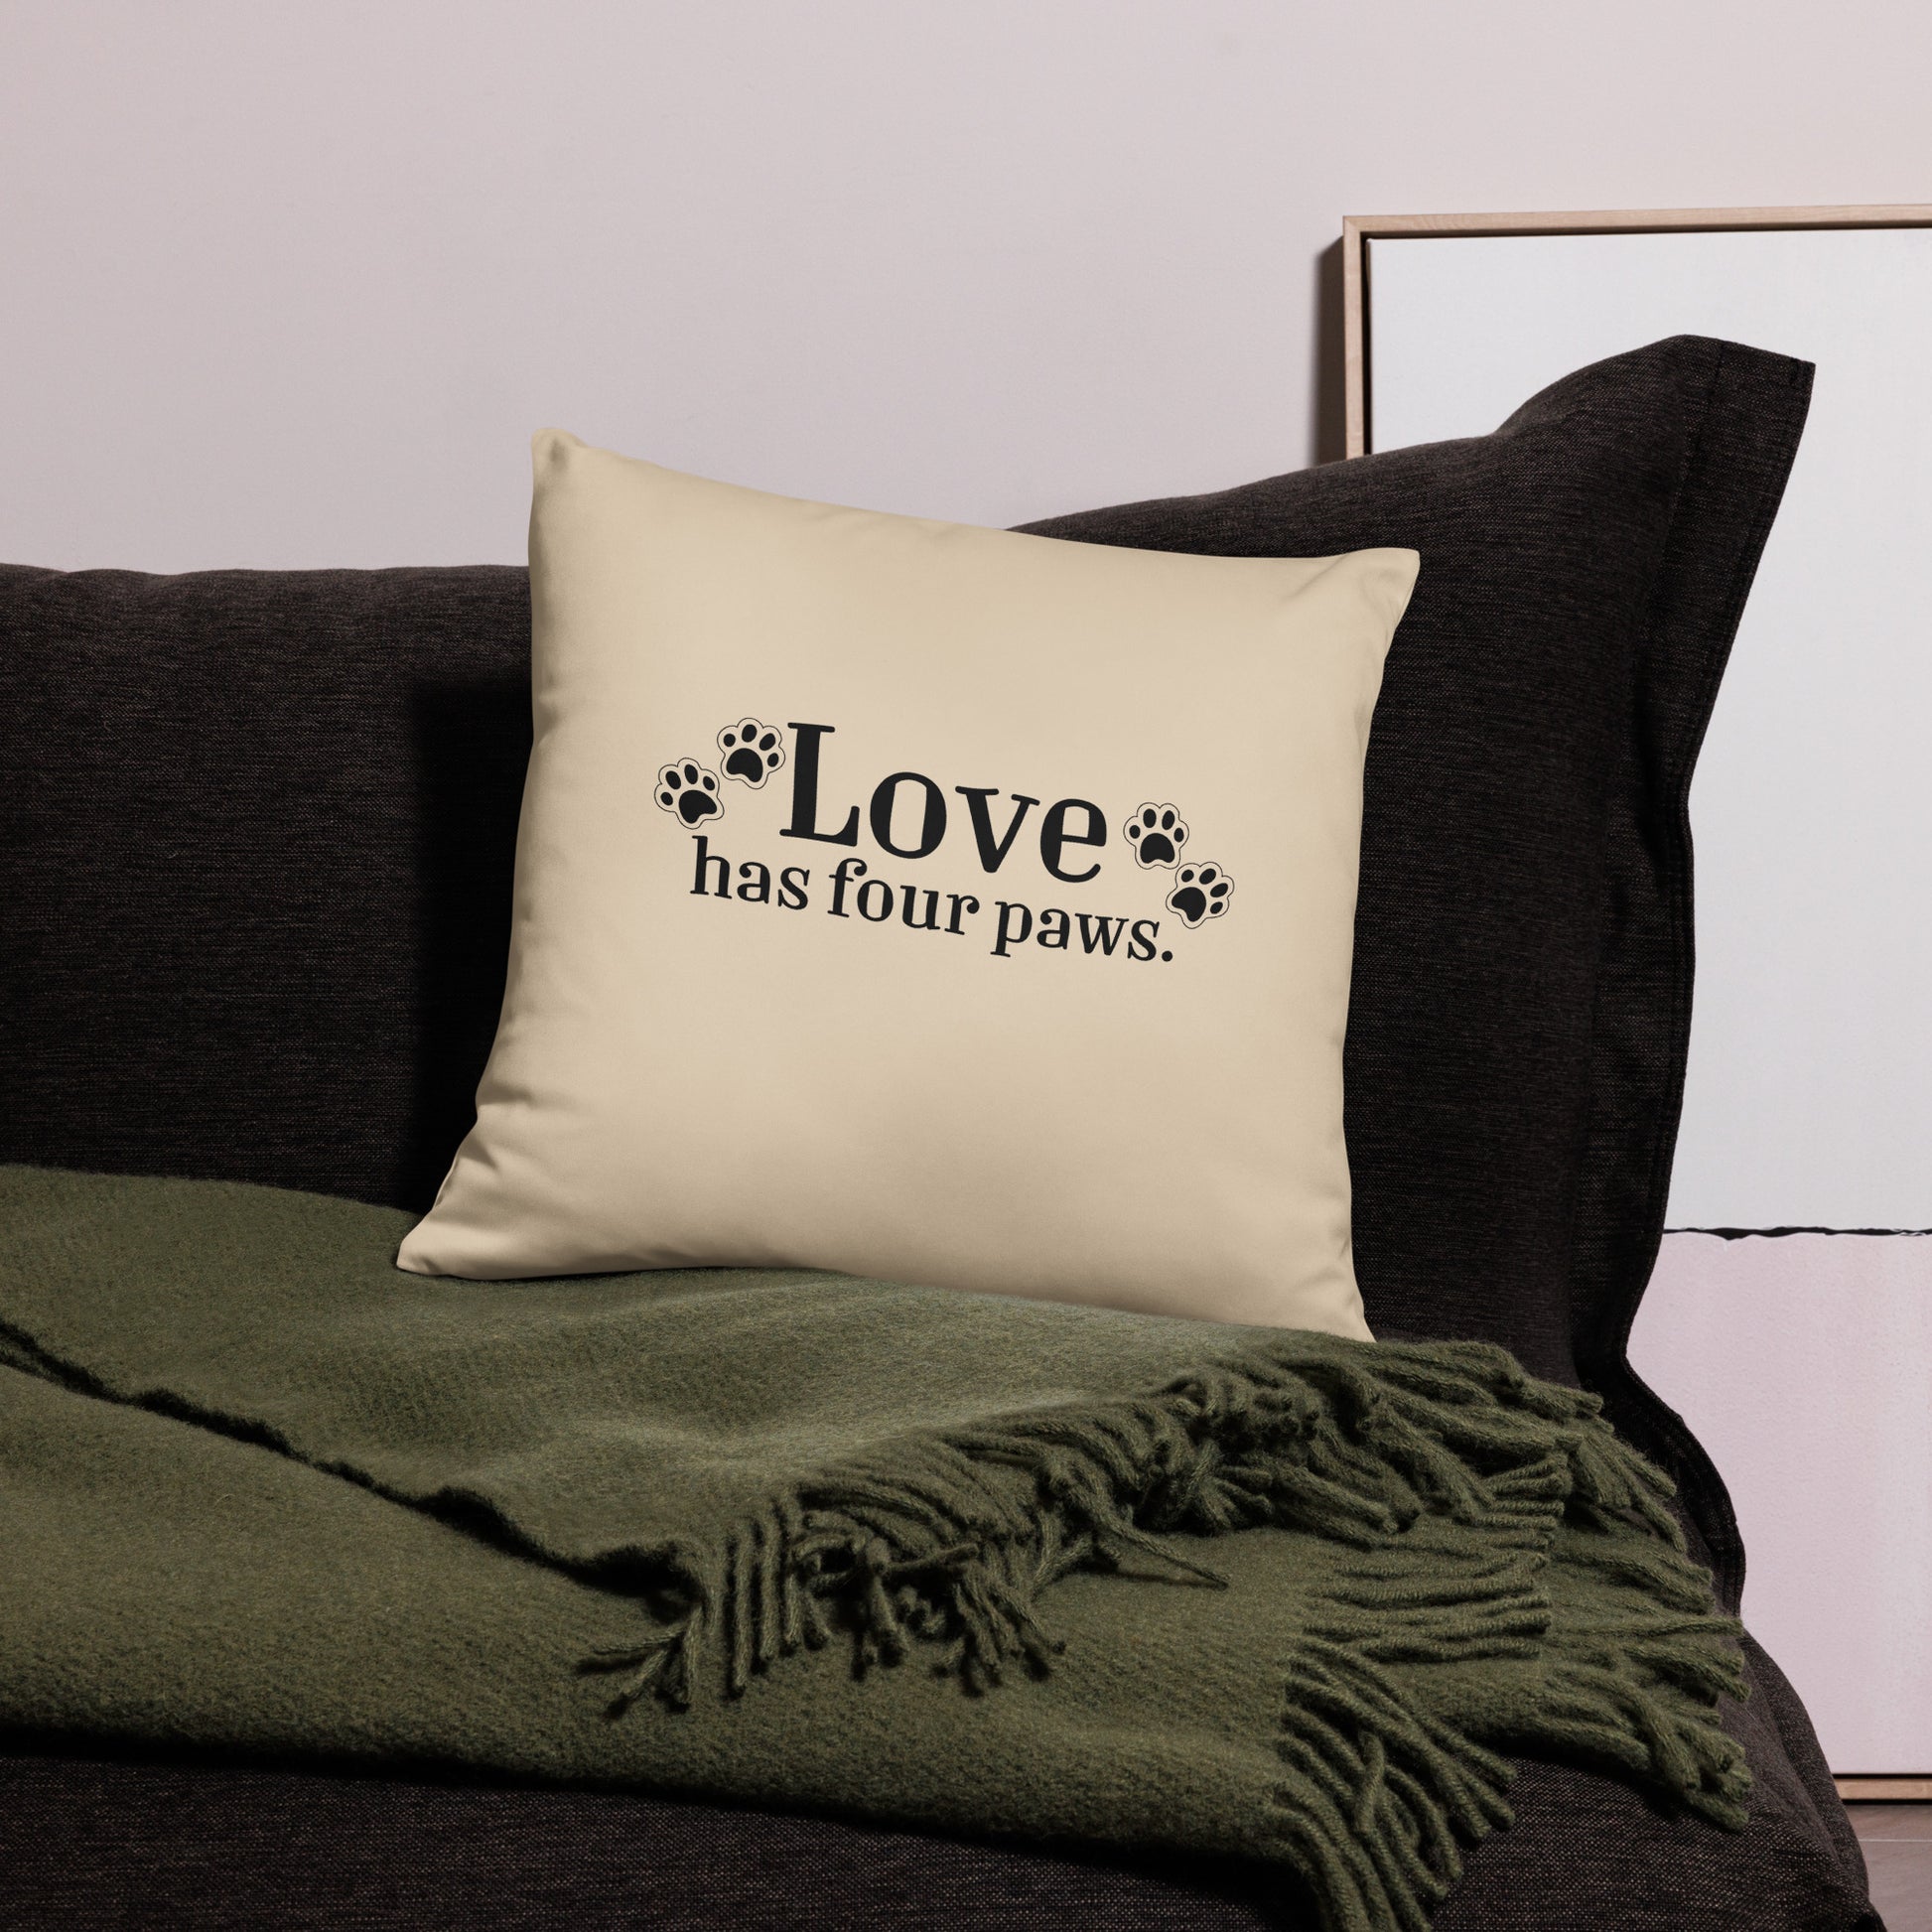 Love has four paws Pillow – Sew Many Things & More